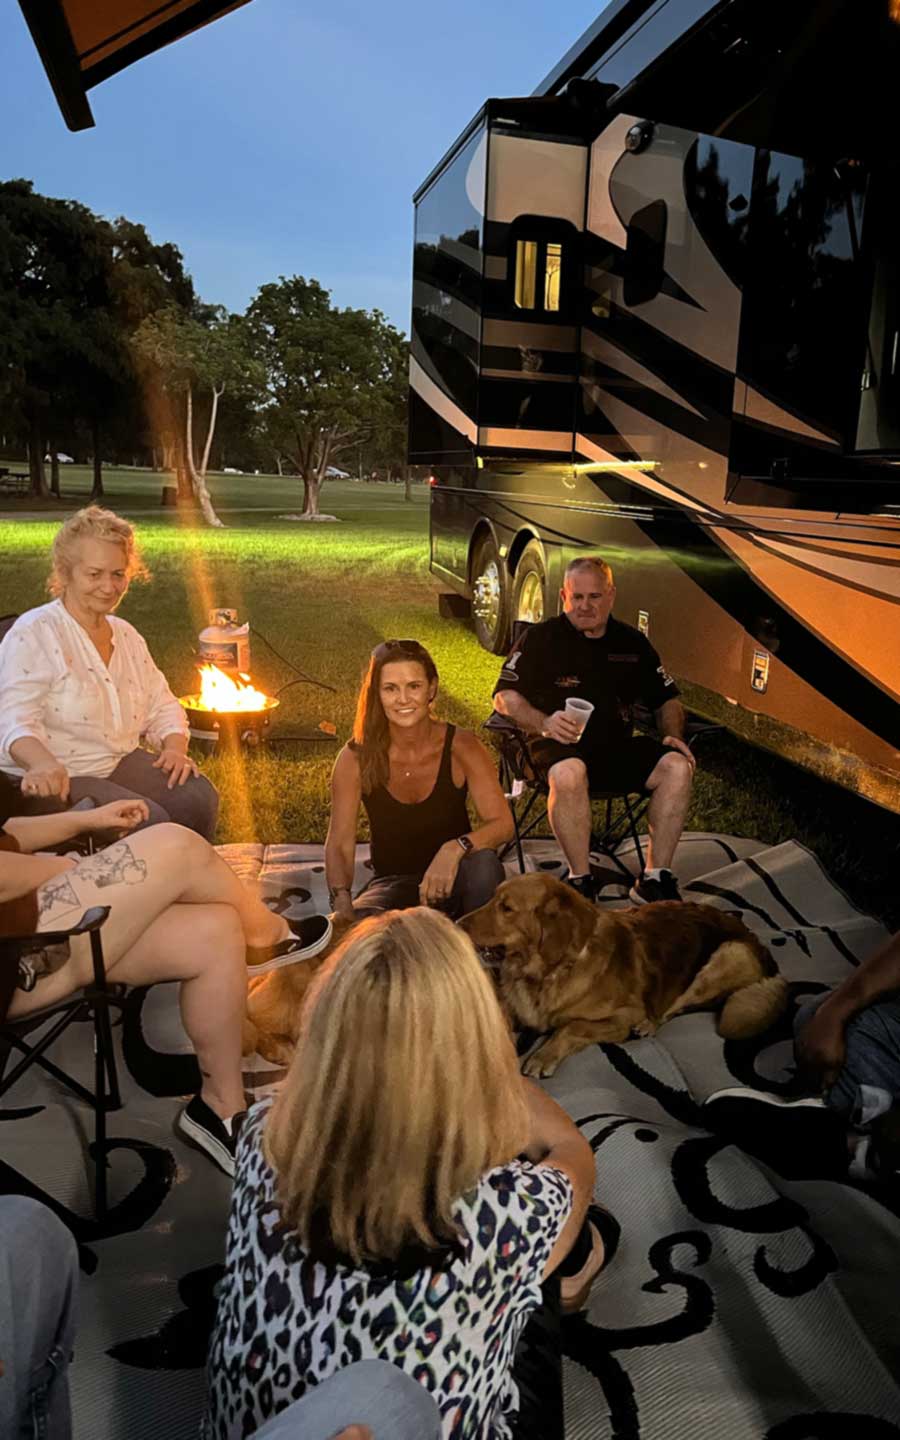 Friends relaxing outside of their RV at night